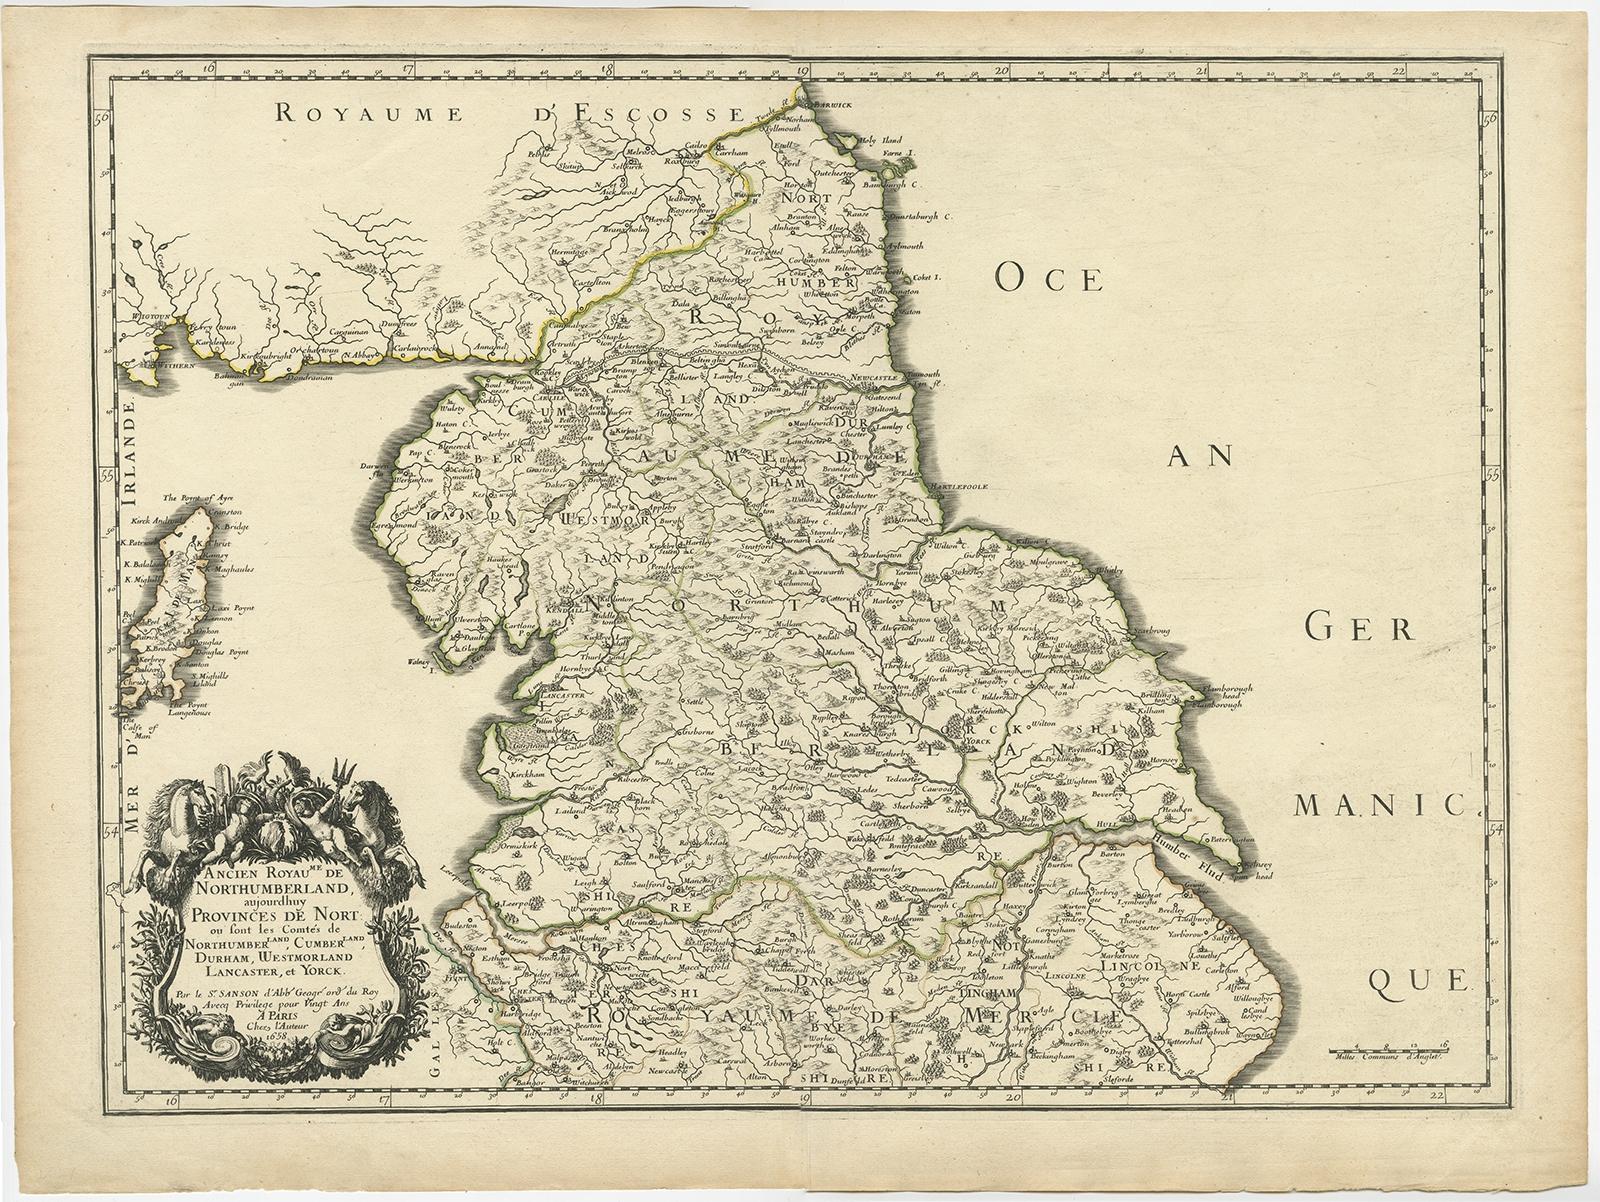 Antique map titled 'Ancien Royaume de Northumberland, aujourdhuy Provinces de Nort (..)'. 

Engraved map of northern England, focusing on Northumberland. 

Artists and Engravers: Nicholas Sanson (1600-1667) is considered the father of French